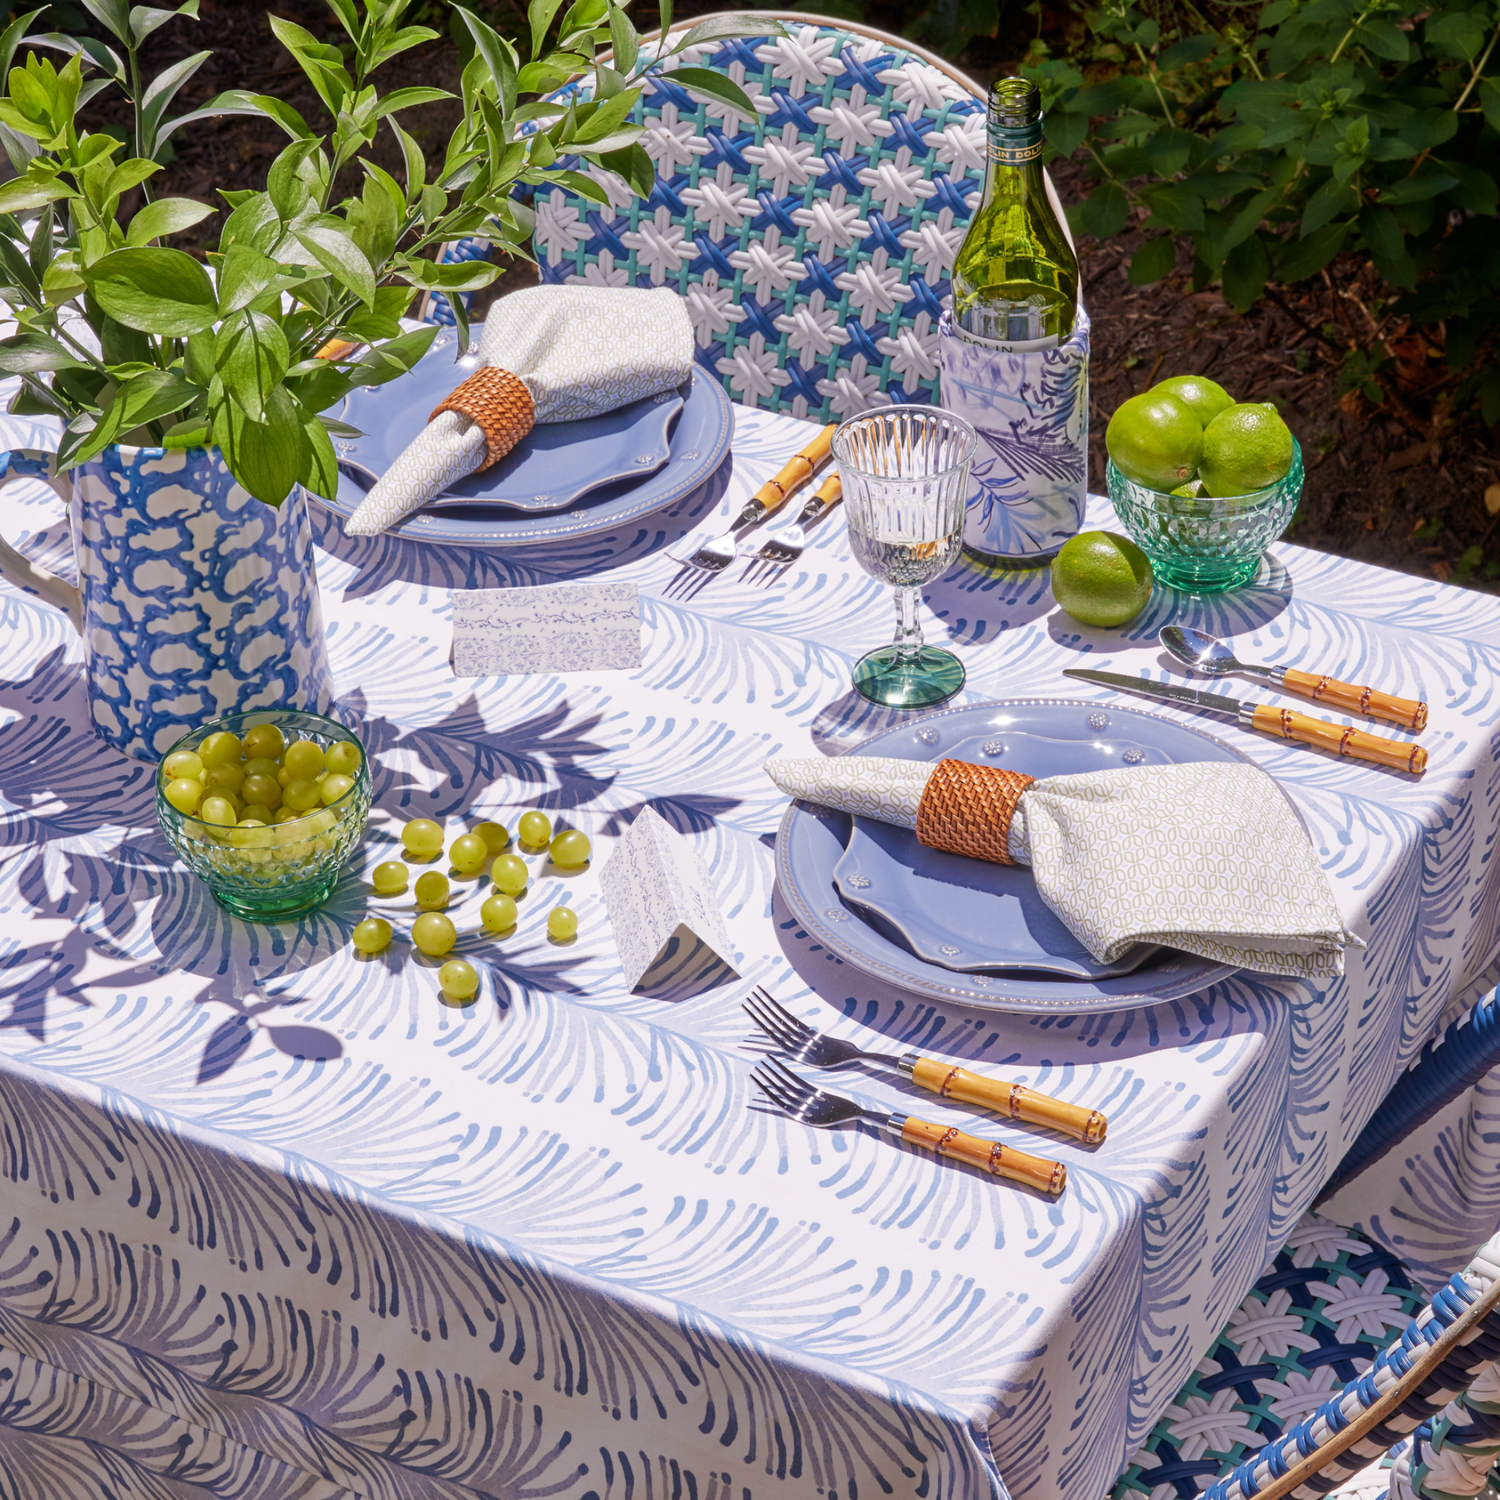 Table styled with Sky Blue Botanical Stripe Tablecloth and Moss Green Geometric Napkins on blue plates and silverware next to them with fruit cups to the side and plants in blue and white vase